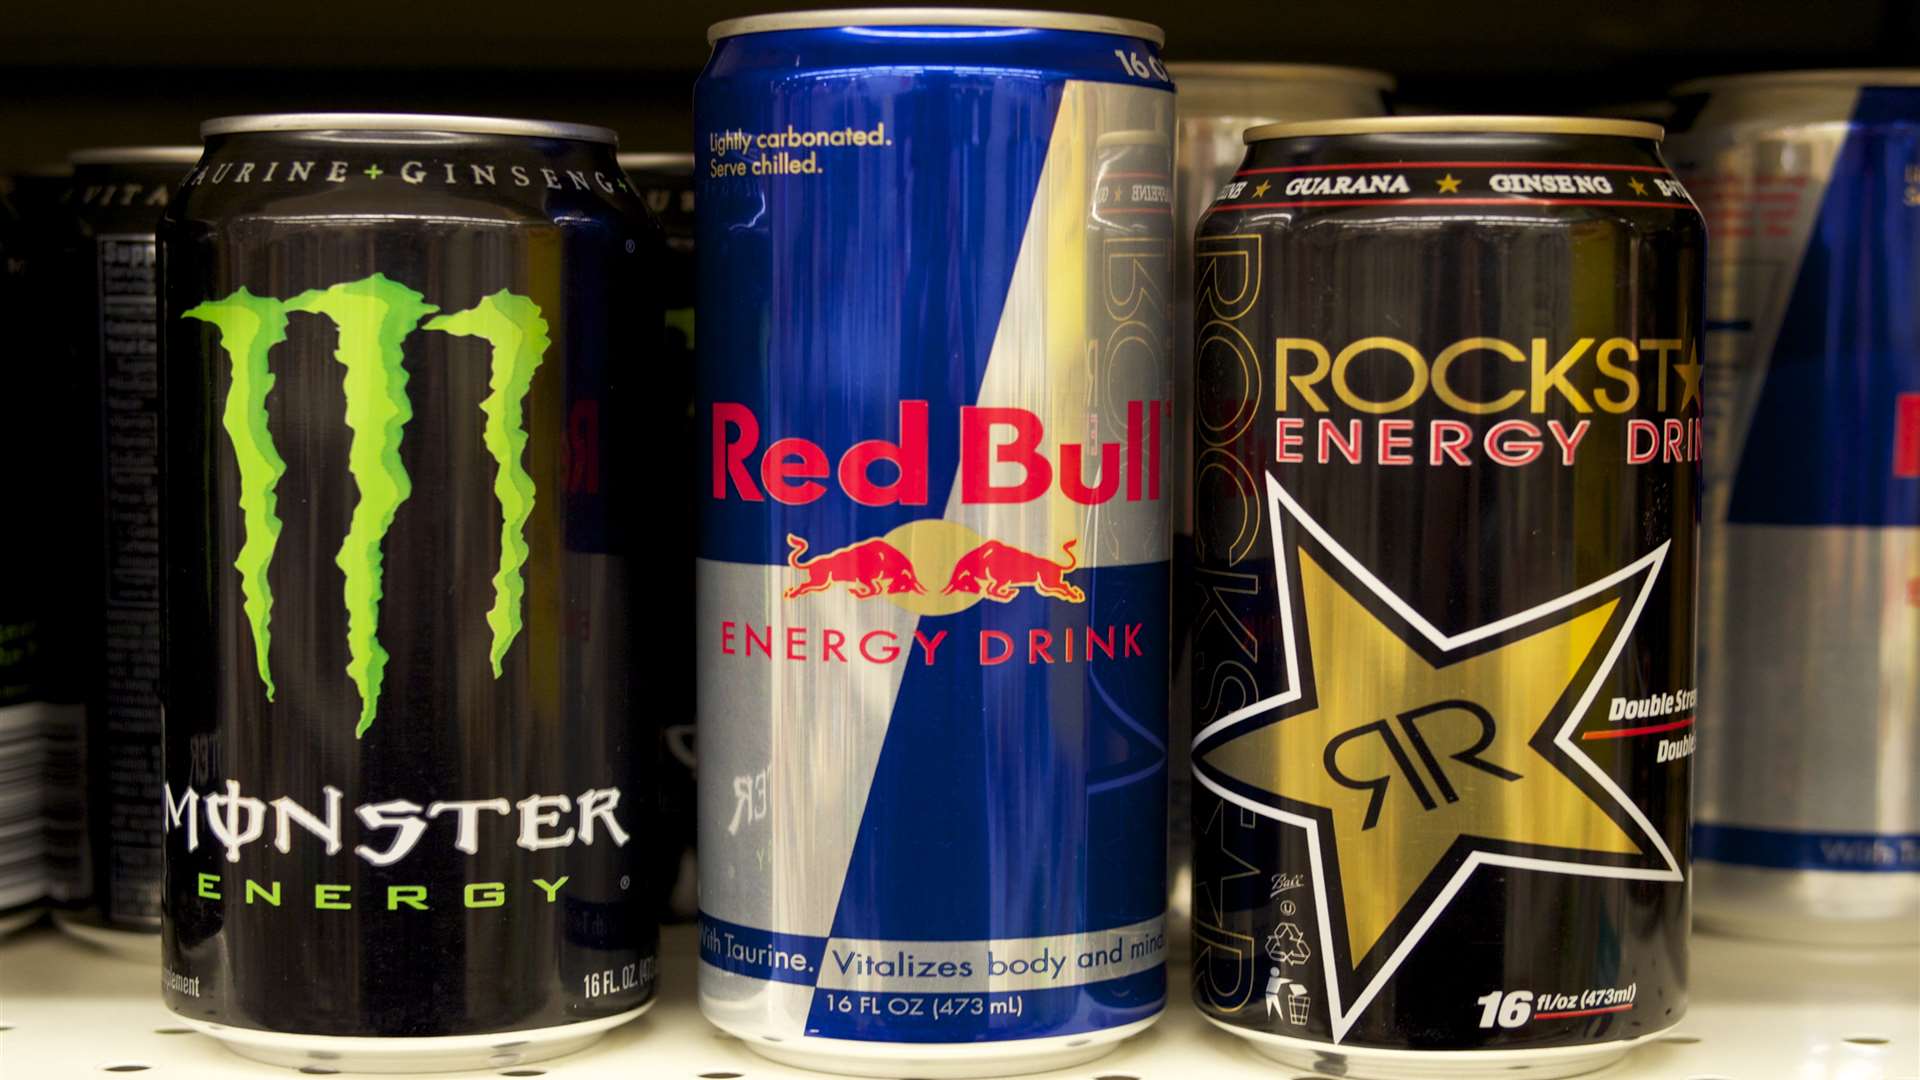 Energy drinks such as Red Bull are no longer sold to under-16s in two Maidstone shops